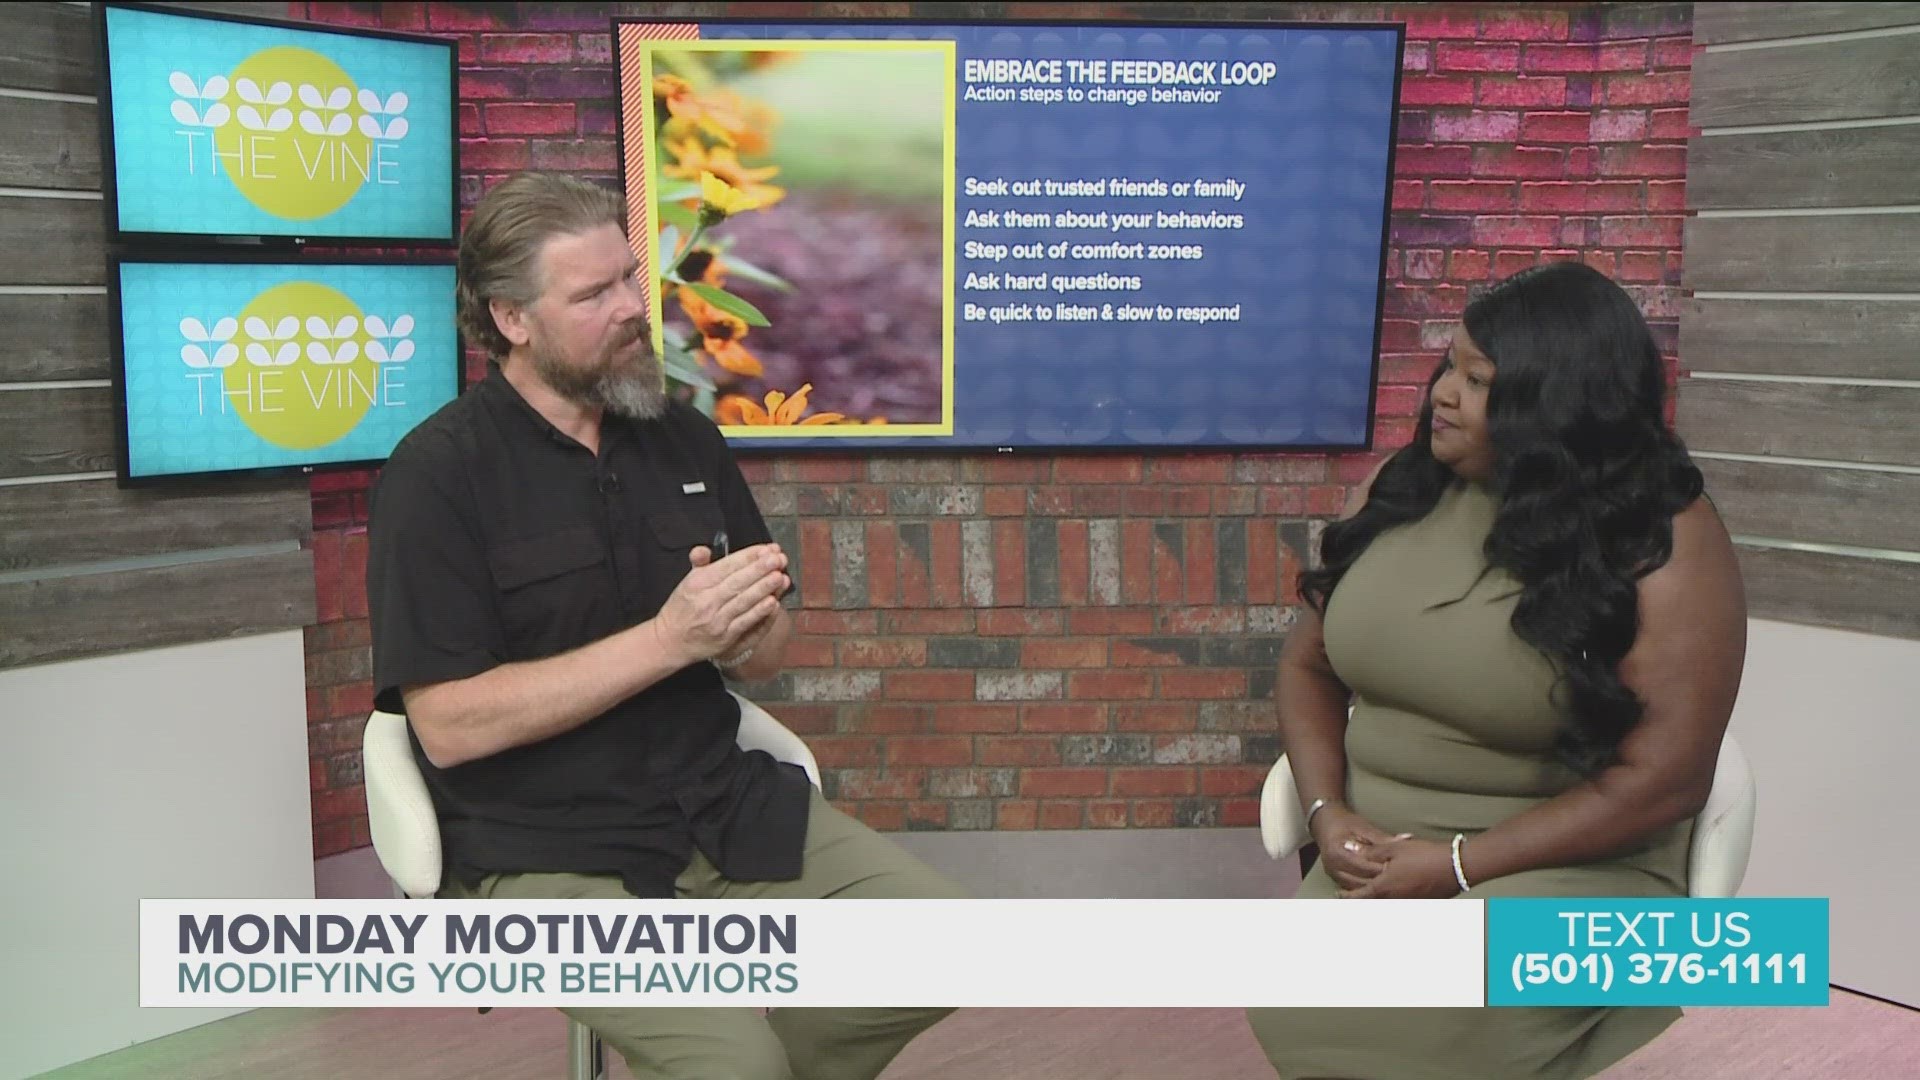 Life coach, Deana Williams tells us more about how you can modify your life.